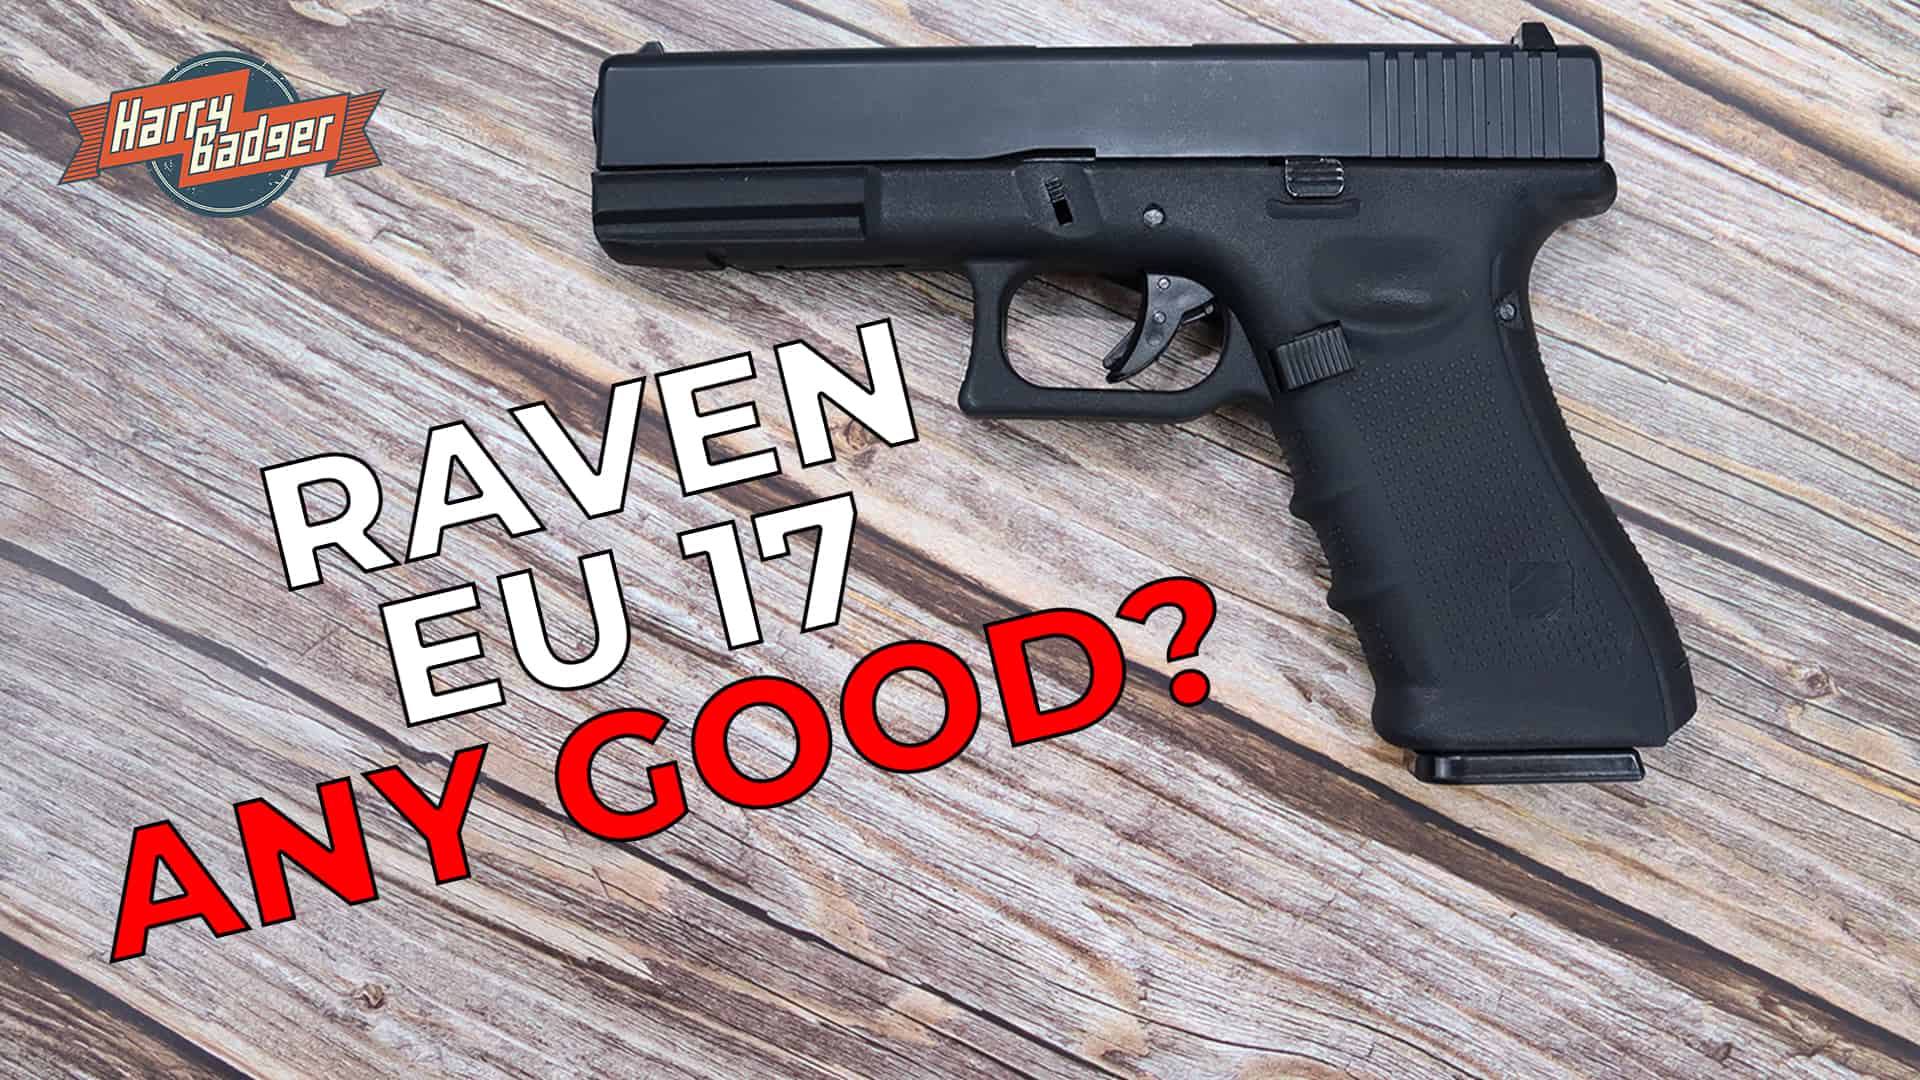 Raven EU 17 Review - Is It any Good?